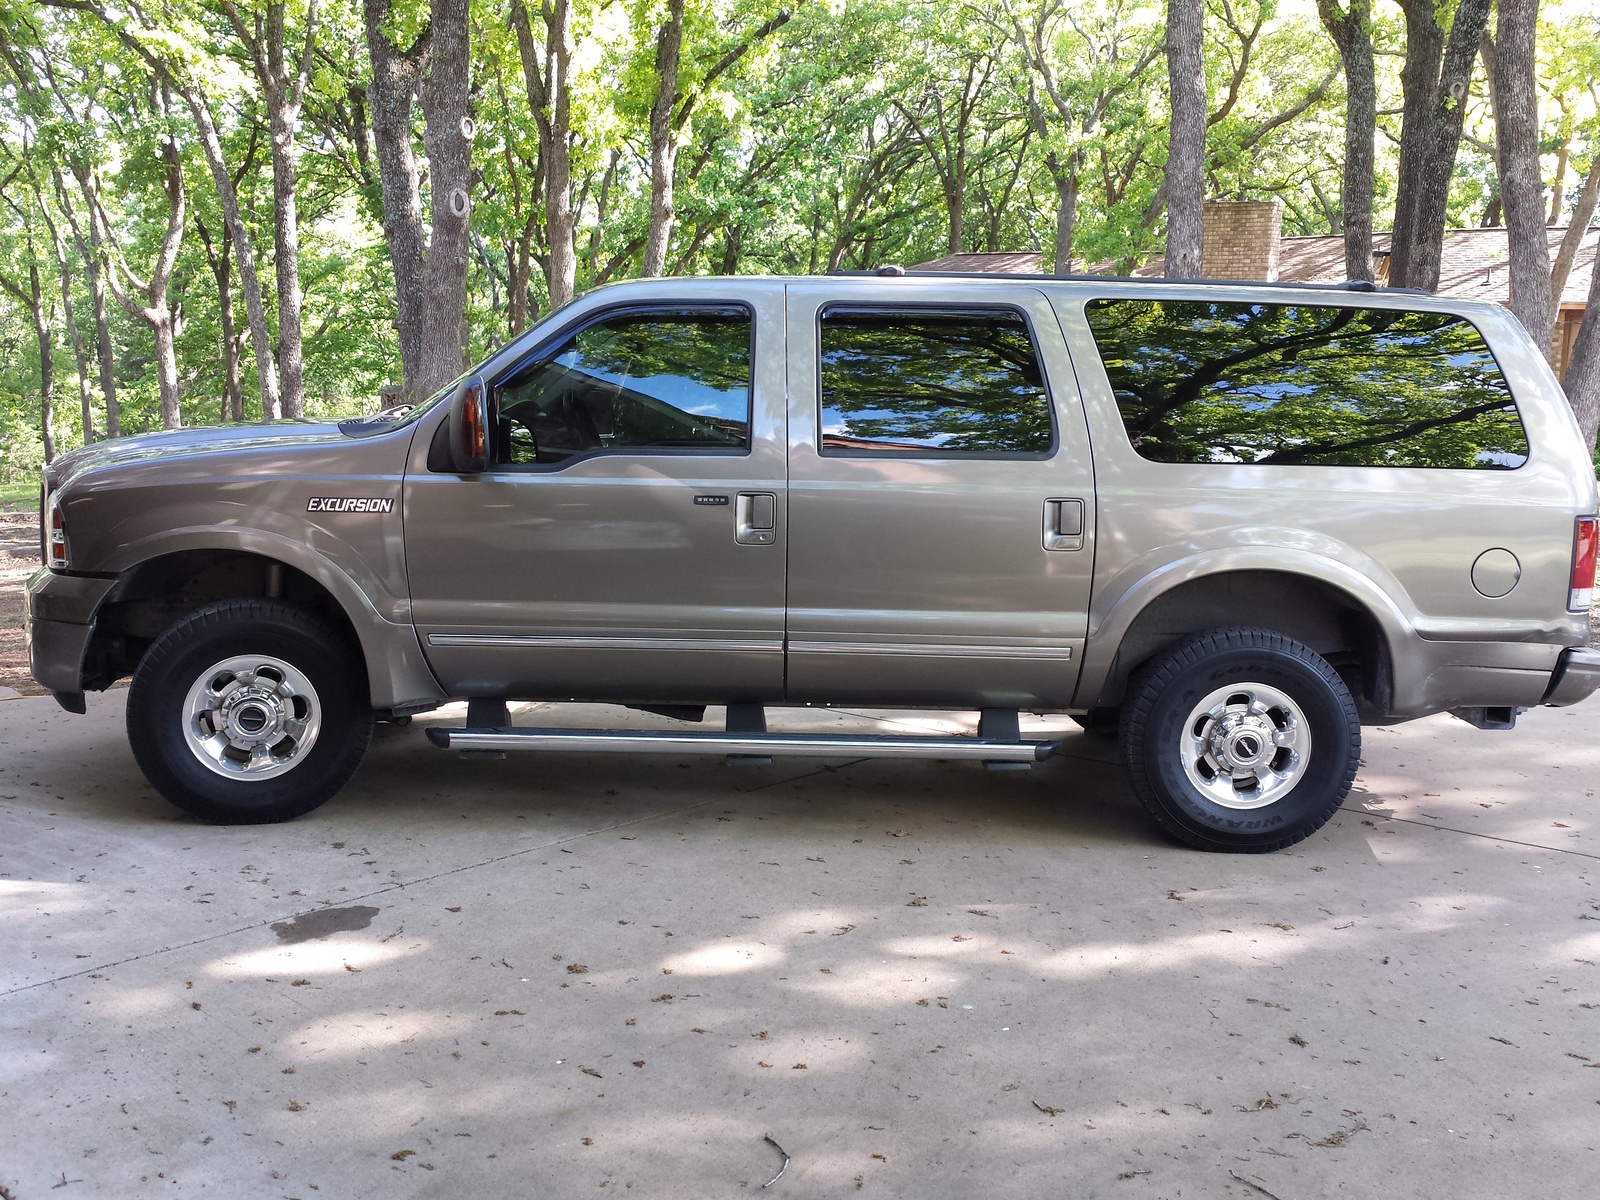 2005 Ford excursion diesel reliability #3